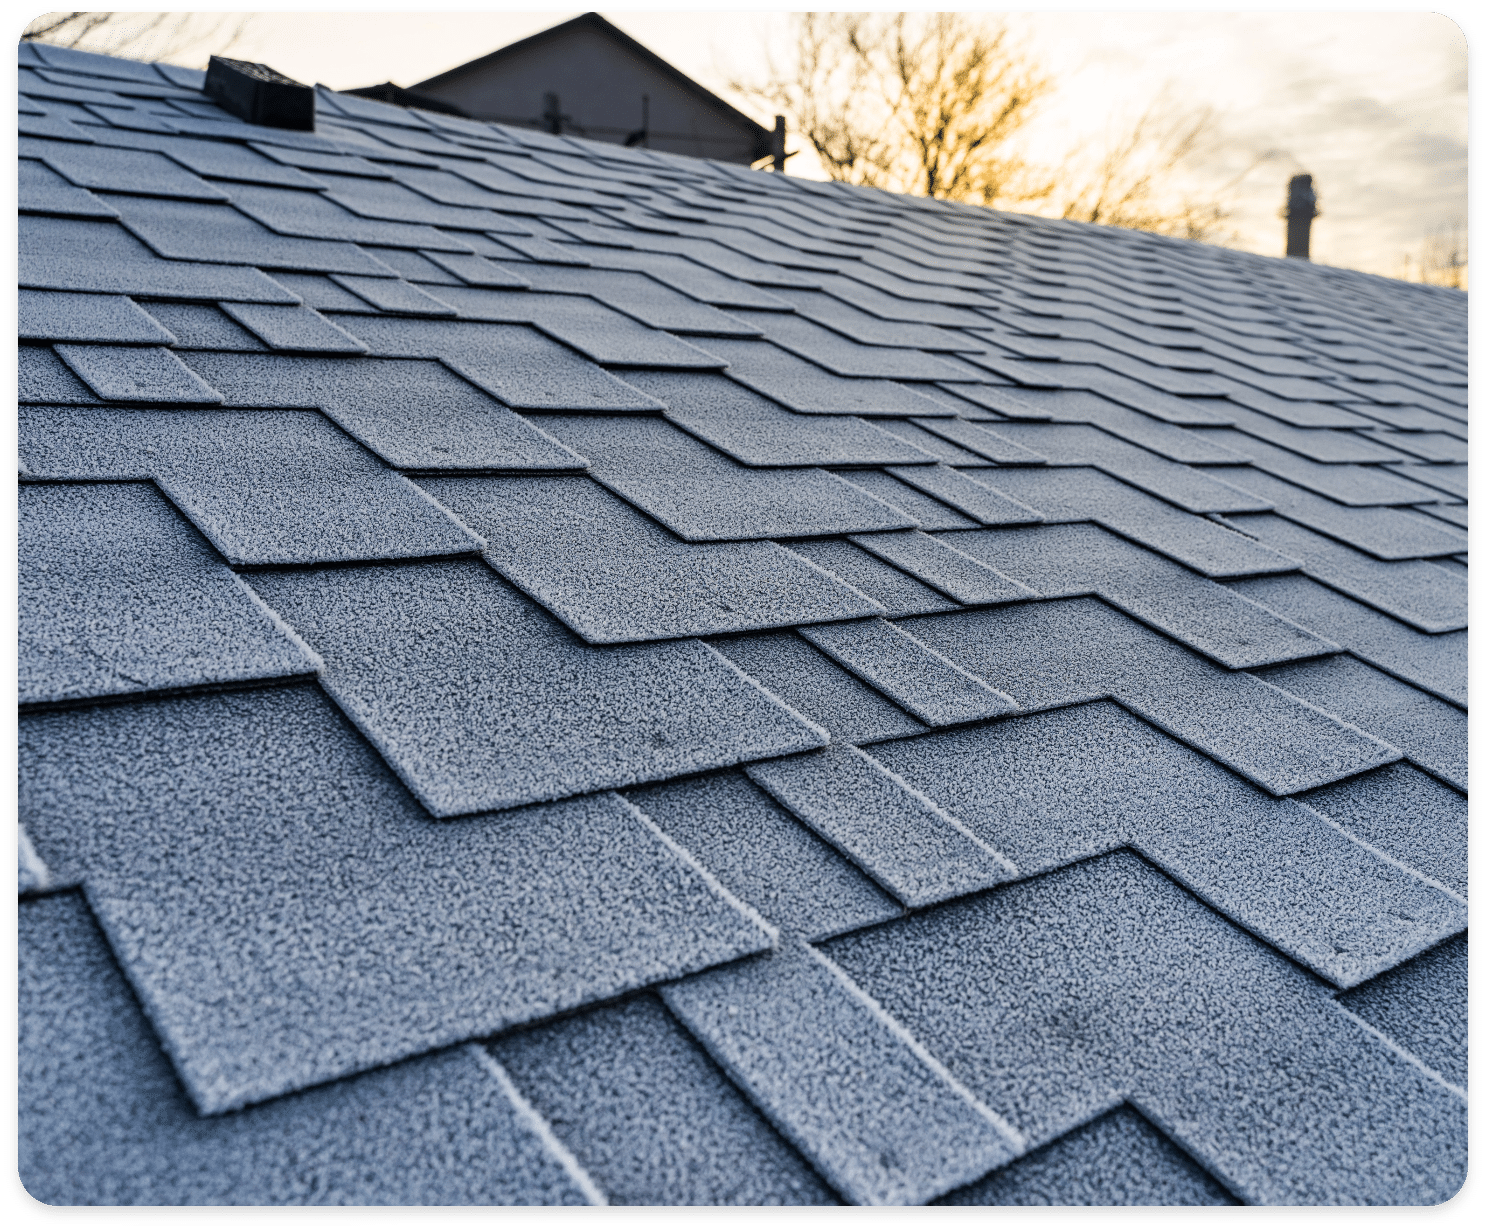 Residential Architectual Roogin Shingles